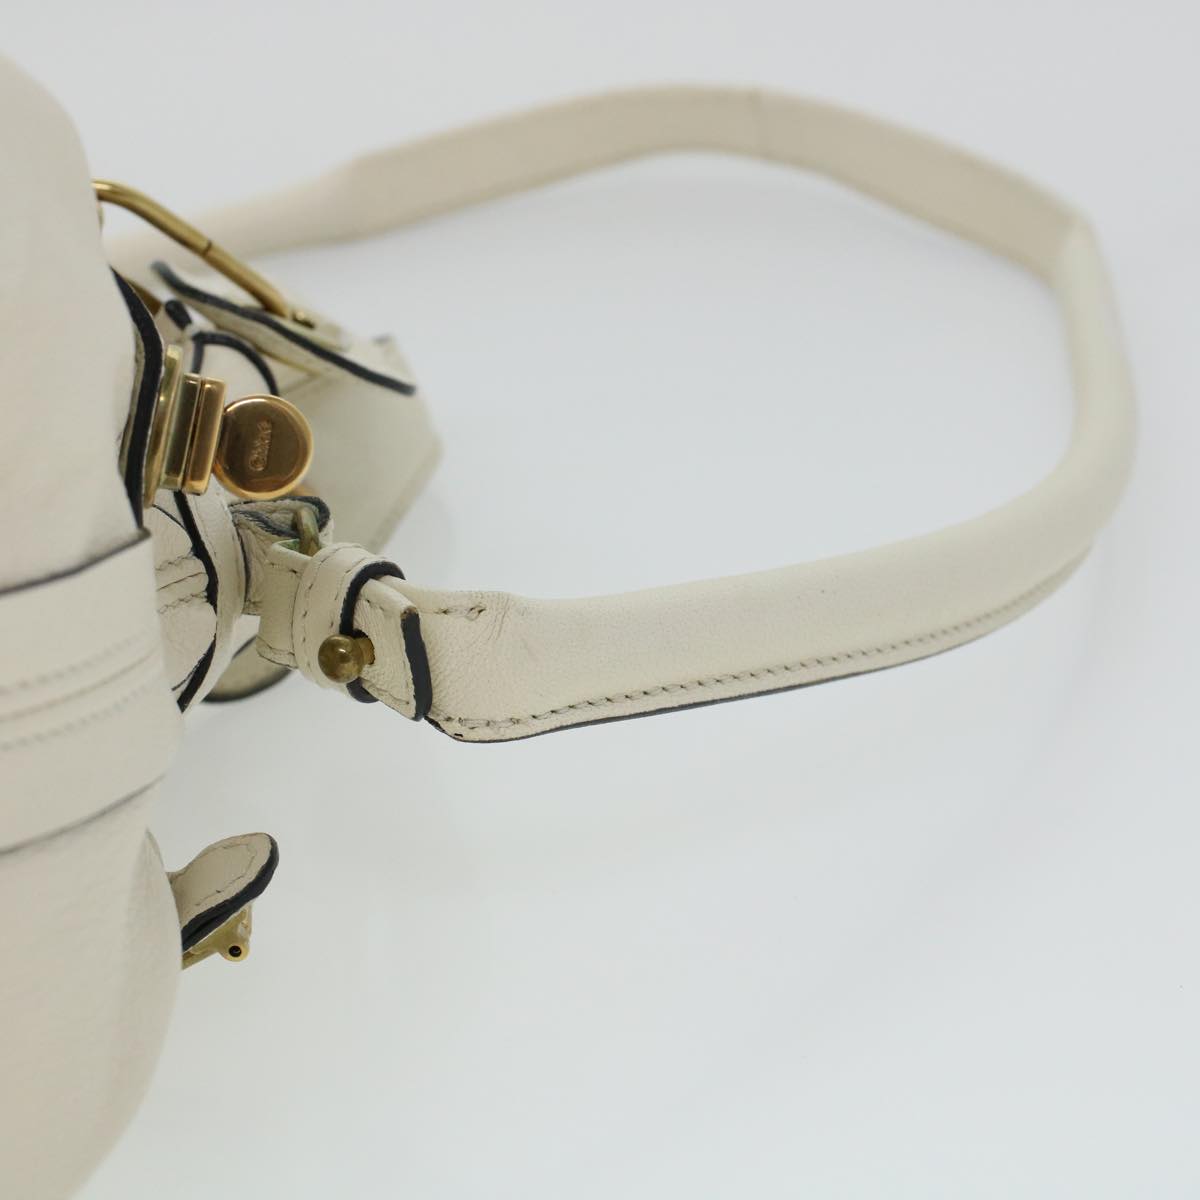 Chloe Paraty Hand Bag Leather 2way White 04-11-50 Auth 44037